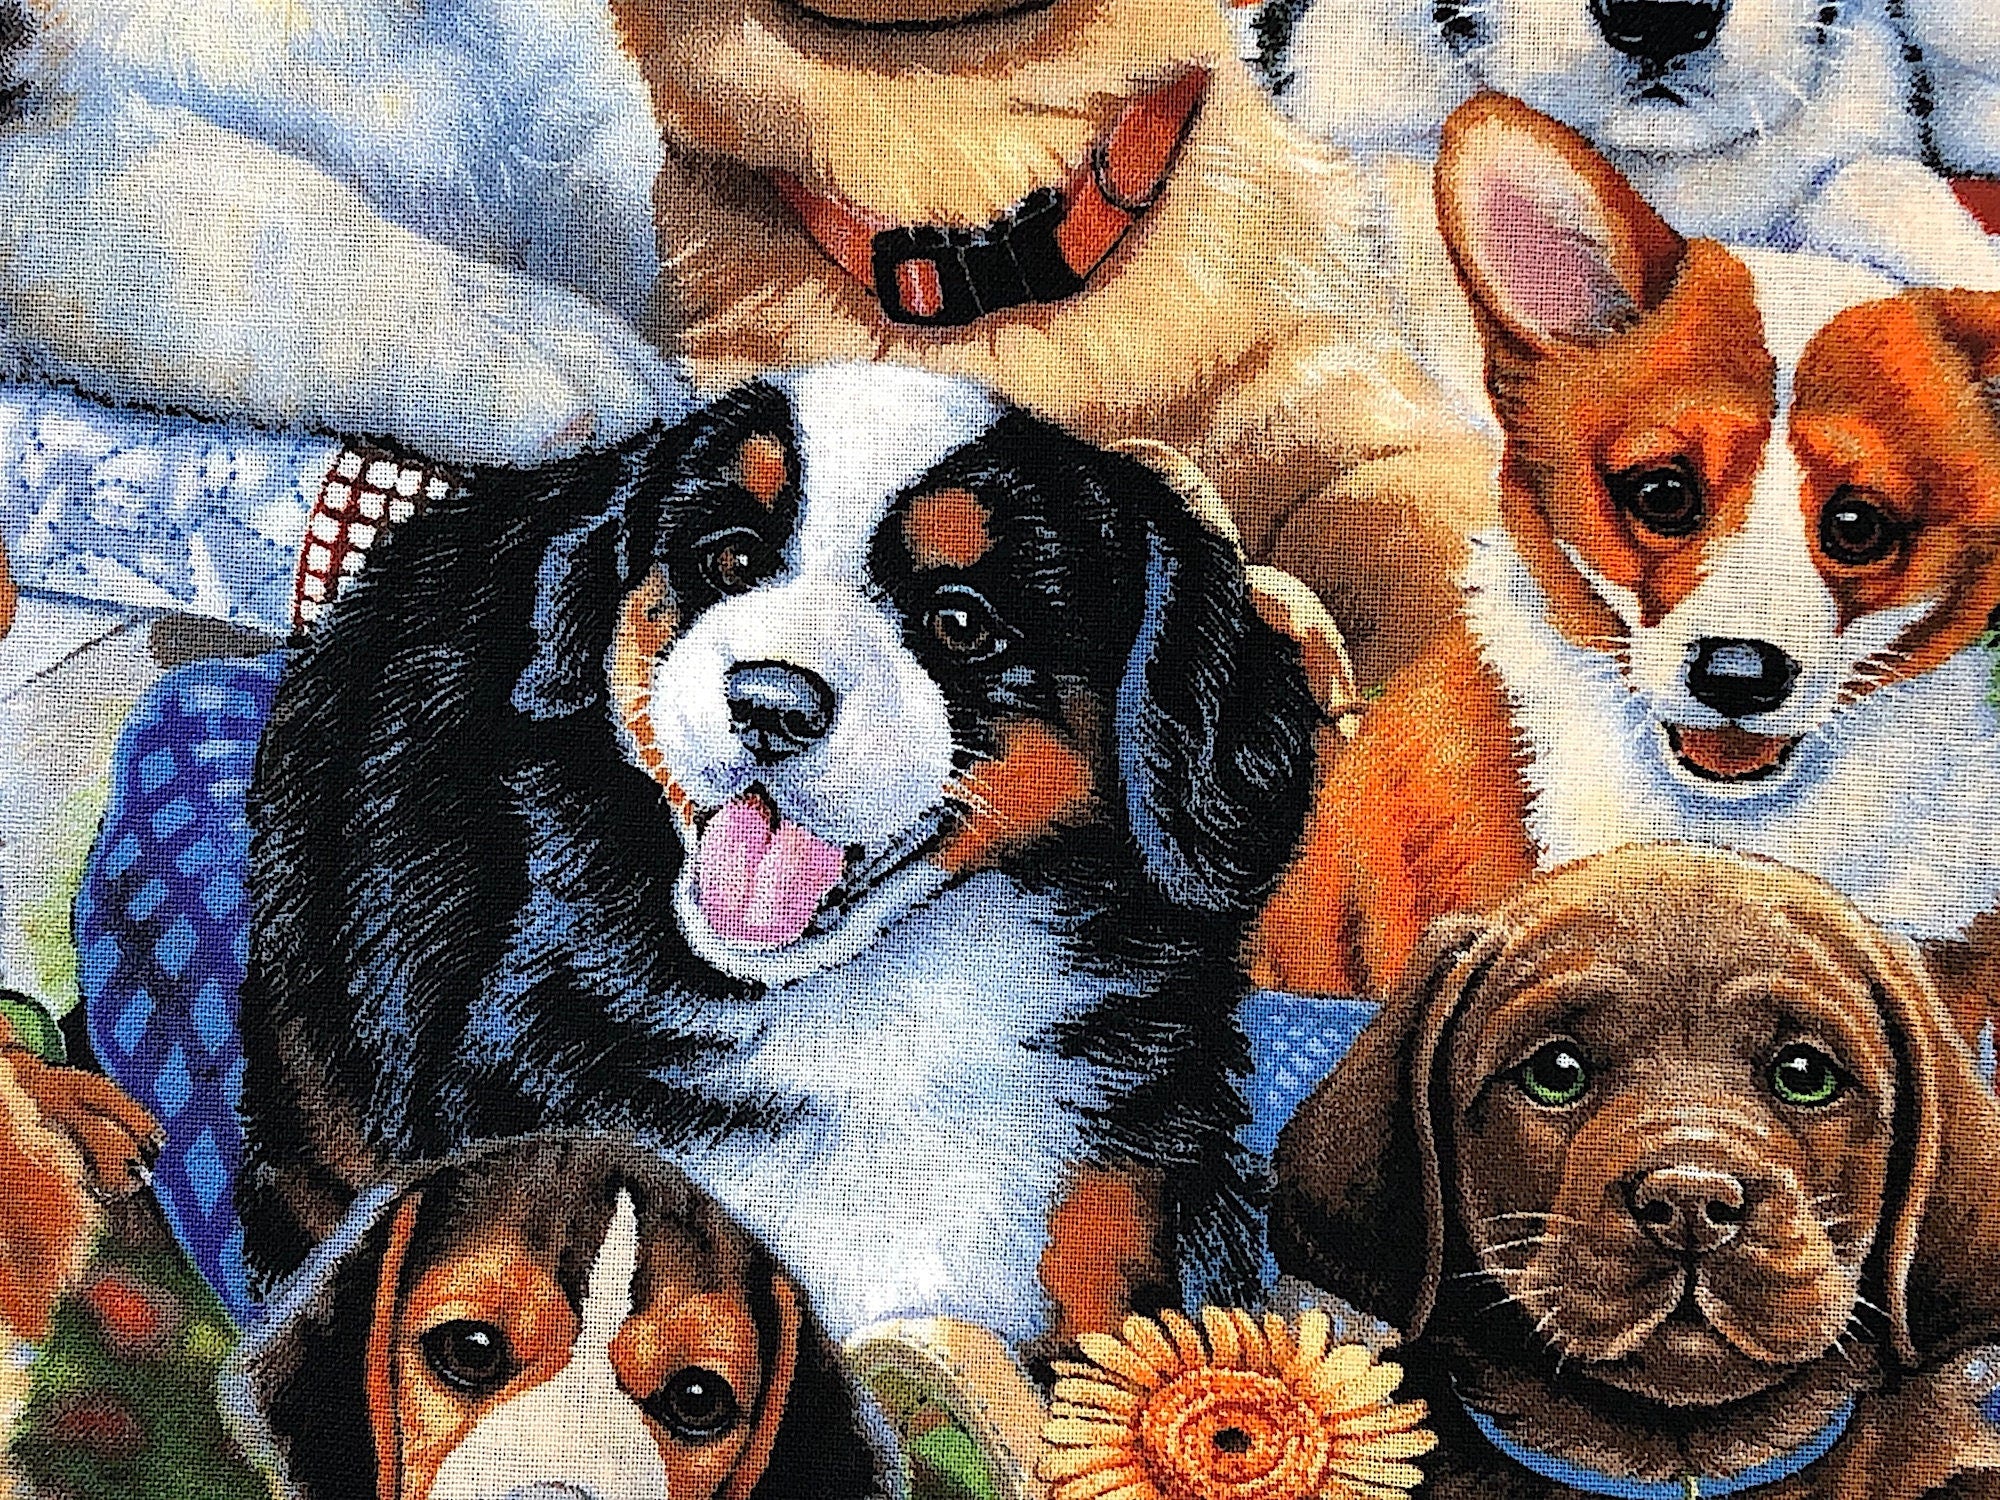 This fabric is called Garden Puppies and has several different breeds of dogs in a garden.